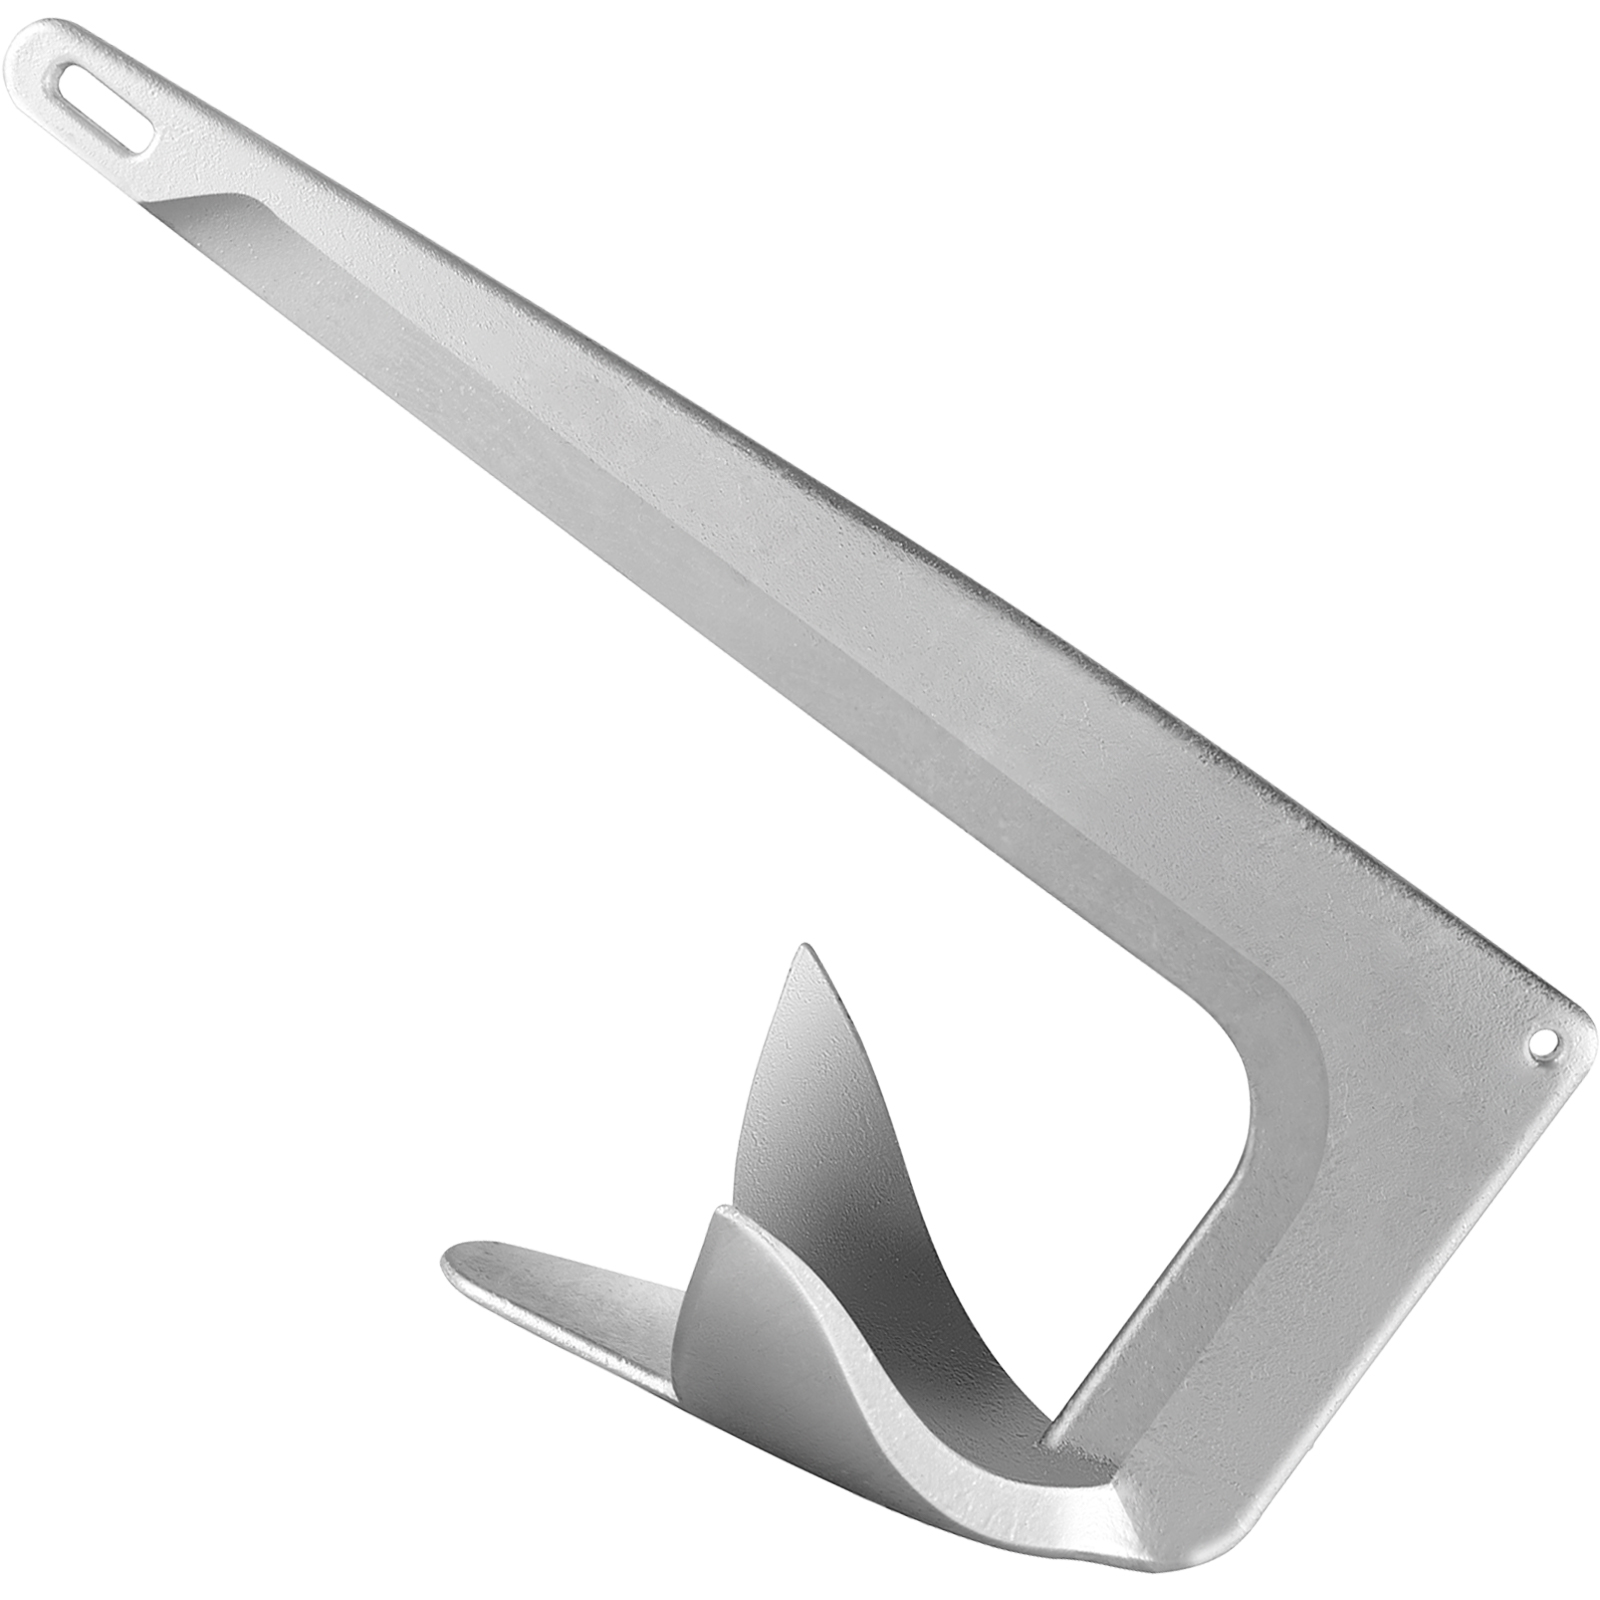 VEVOR Bruce Claw Anchor Boat Anchor 16.5 lb Galvanized Anchor for 23-30 FT Boats от Vevor Many GEOs